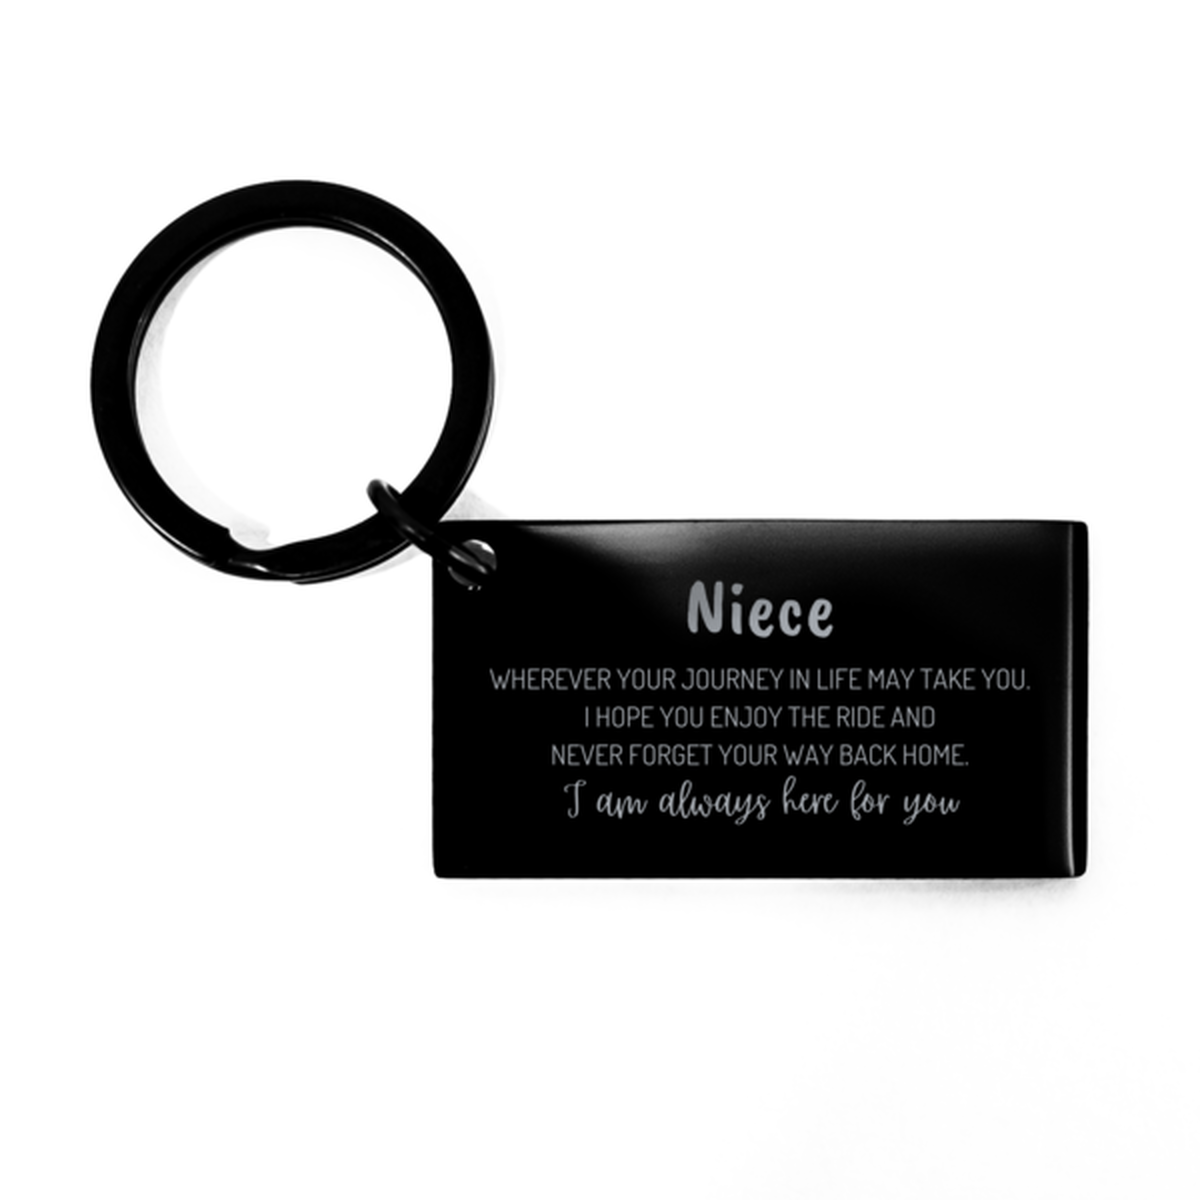 Niece wherever your journey in life may take you, I am always here for you Niece Keychain, Awesome Christmas Gifts For Niece, Niece Birthday Gifts for Men Women Family Loved One